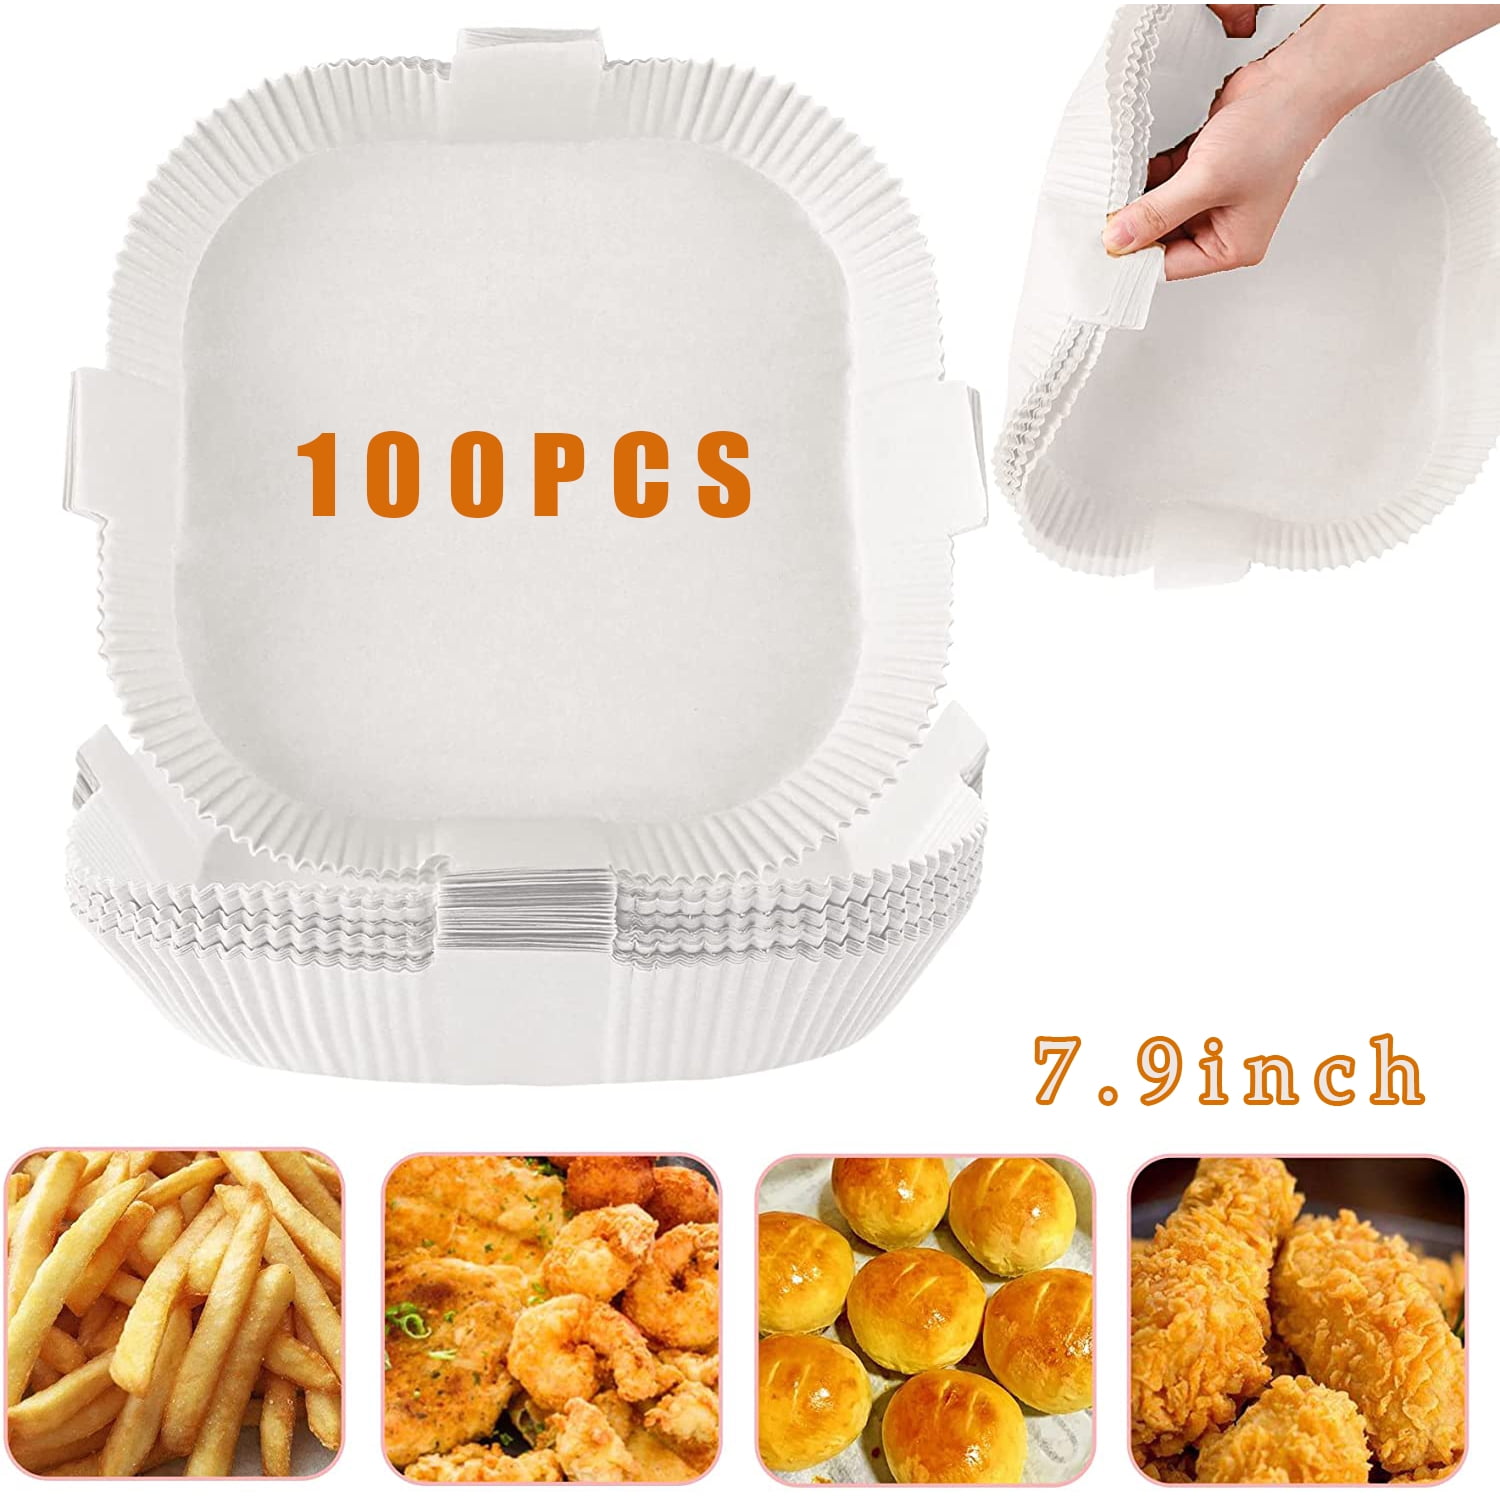 Air Fryer Disposable Paper Liner - 50PCS 7.9 In Square Non-Stick Parchment  Insert Sheet, Oil-proof, Water-proof Baking Filter for 5 6 7 8 Qt Airfryer